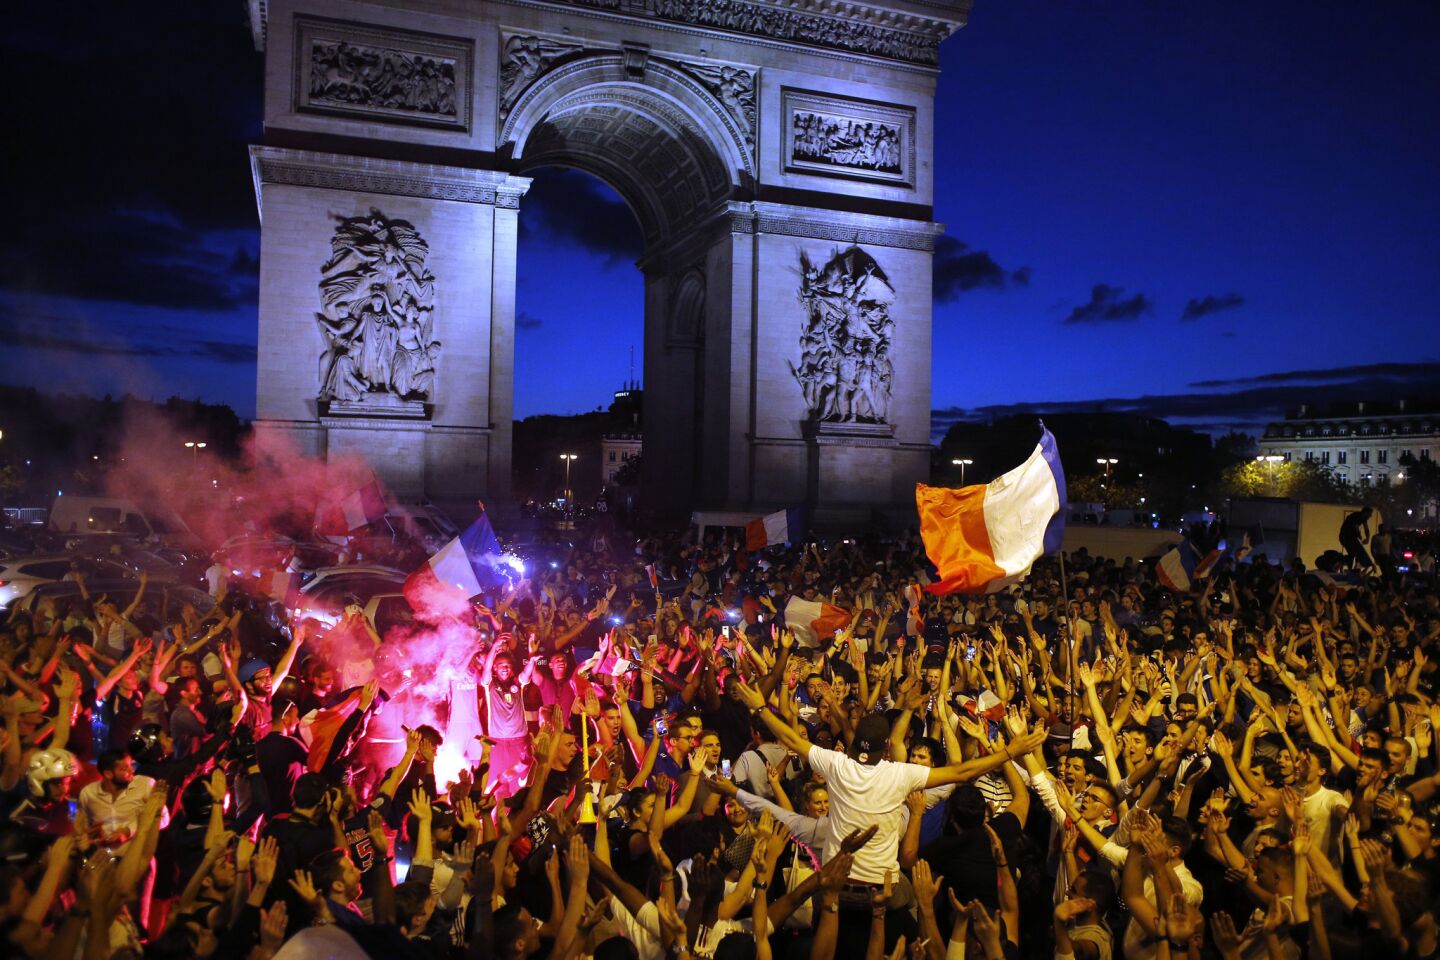 Fans celebrate in front of the Arc de Triomphe after France beat Belgium 1-0 to advance to the finals of the World Cup.